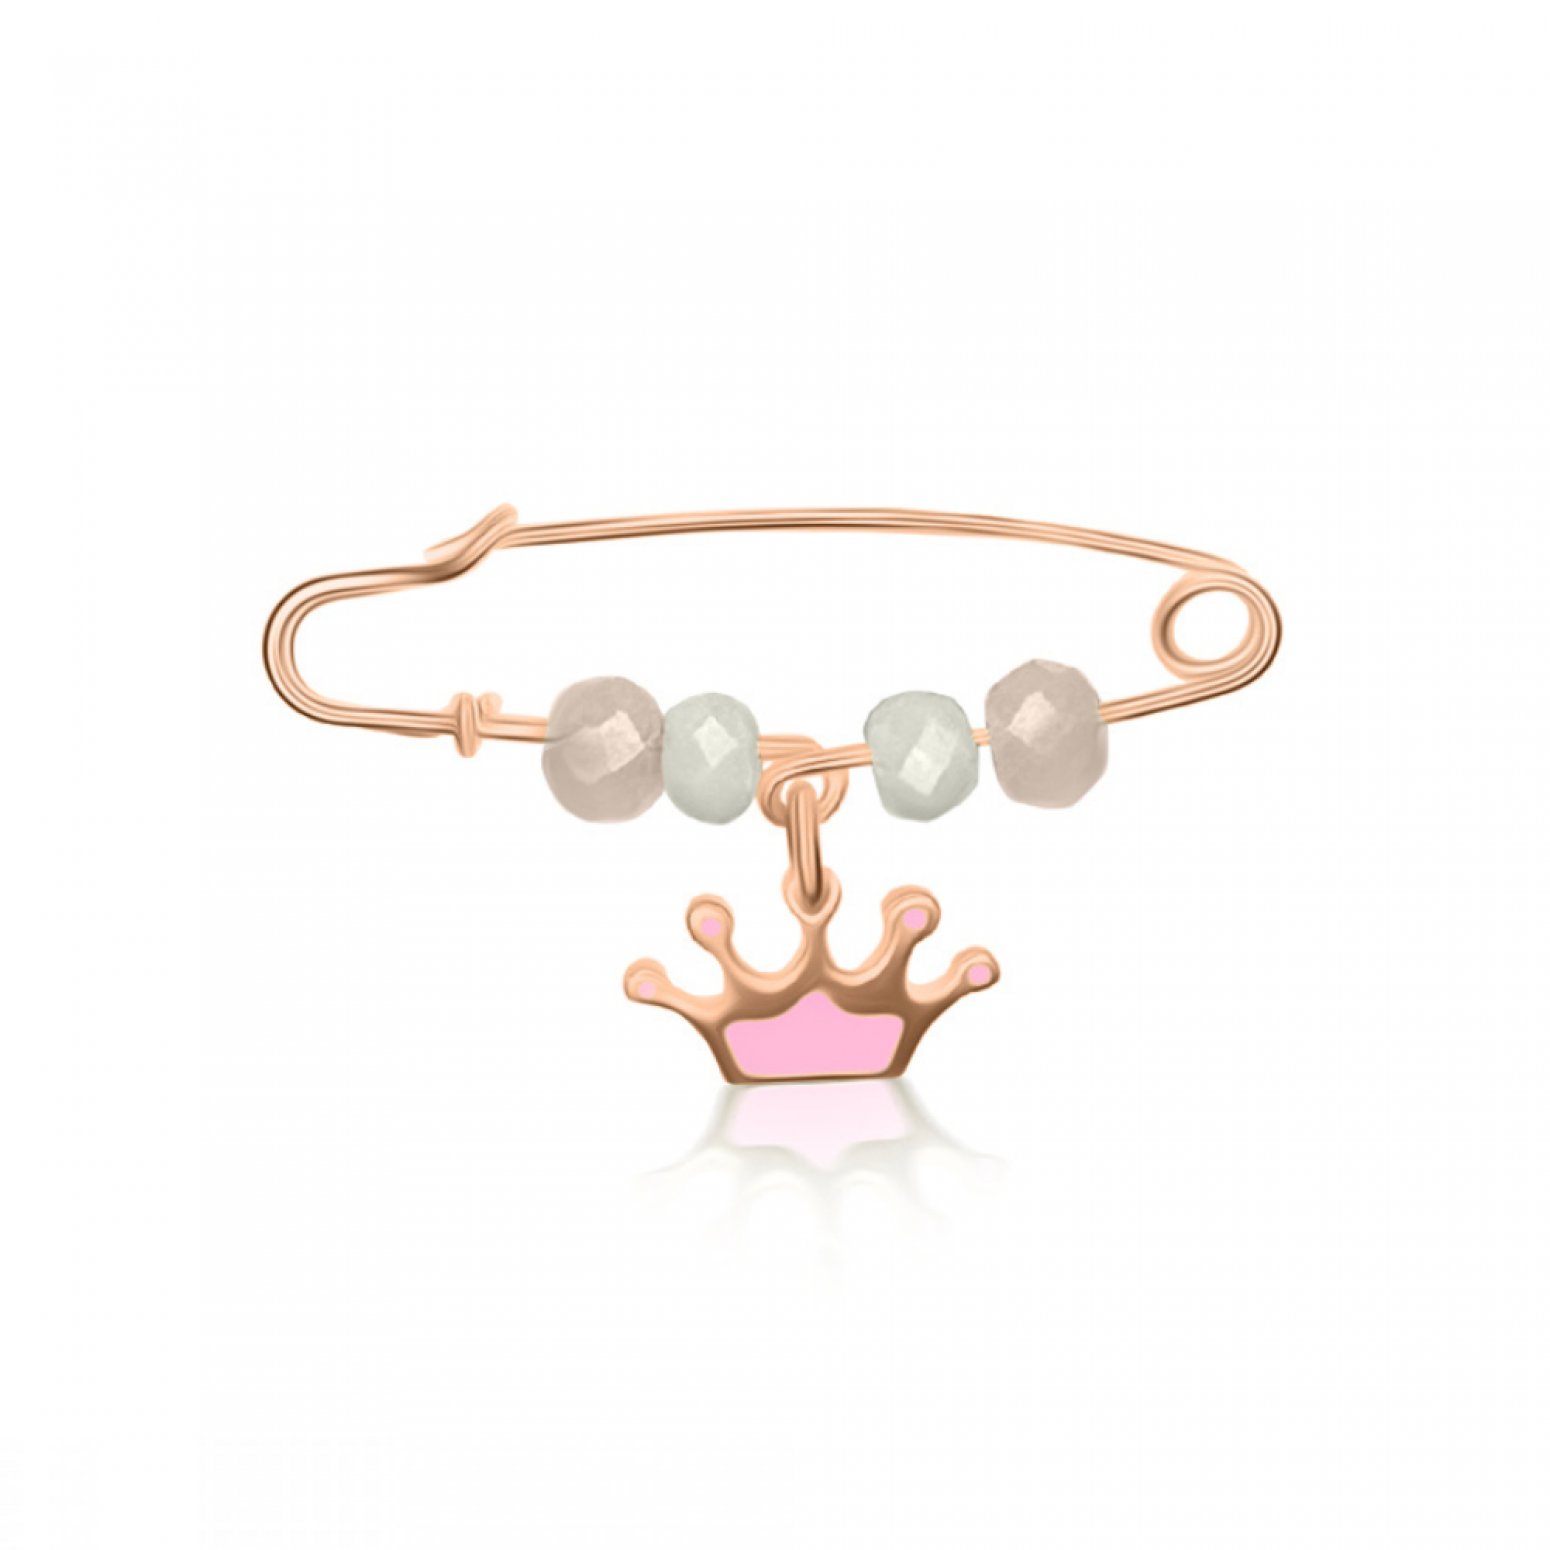 Babies pin K9 pink gold with crown, pink quartz and agate pf0096 BABIES Κοσμηματα - chrilia.gr